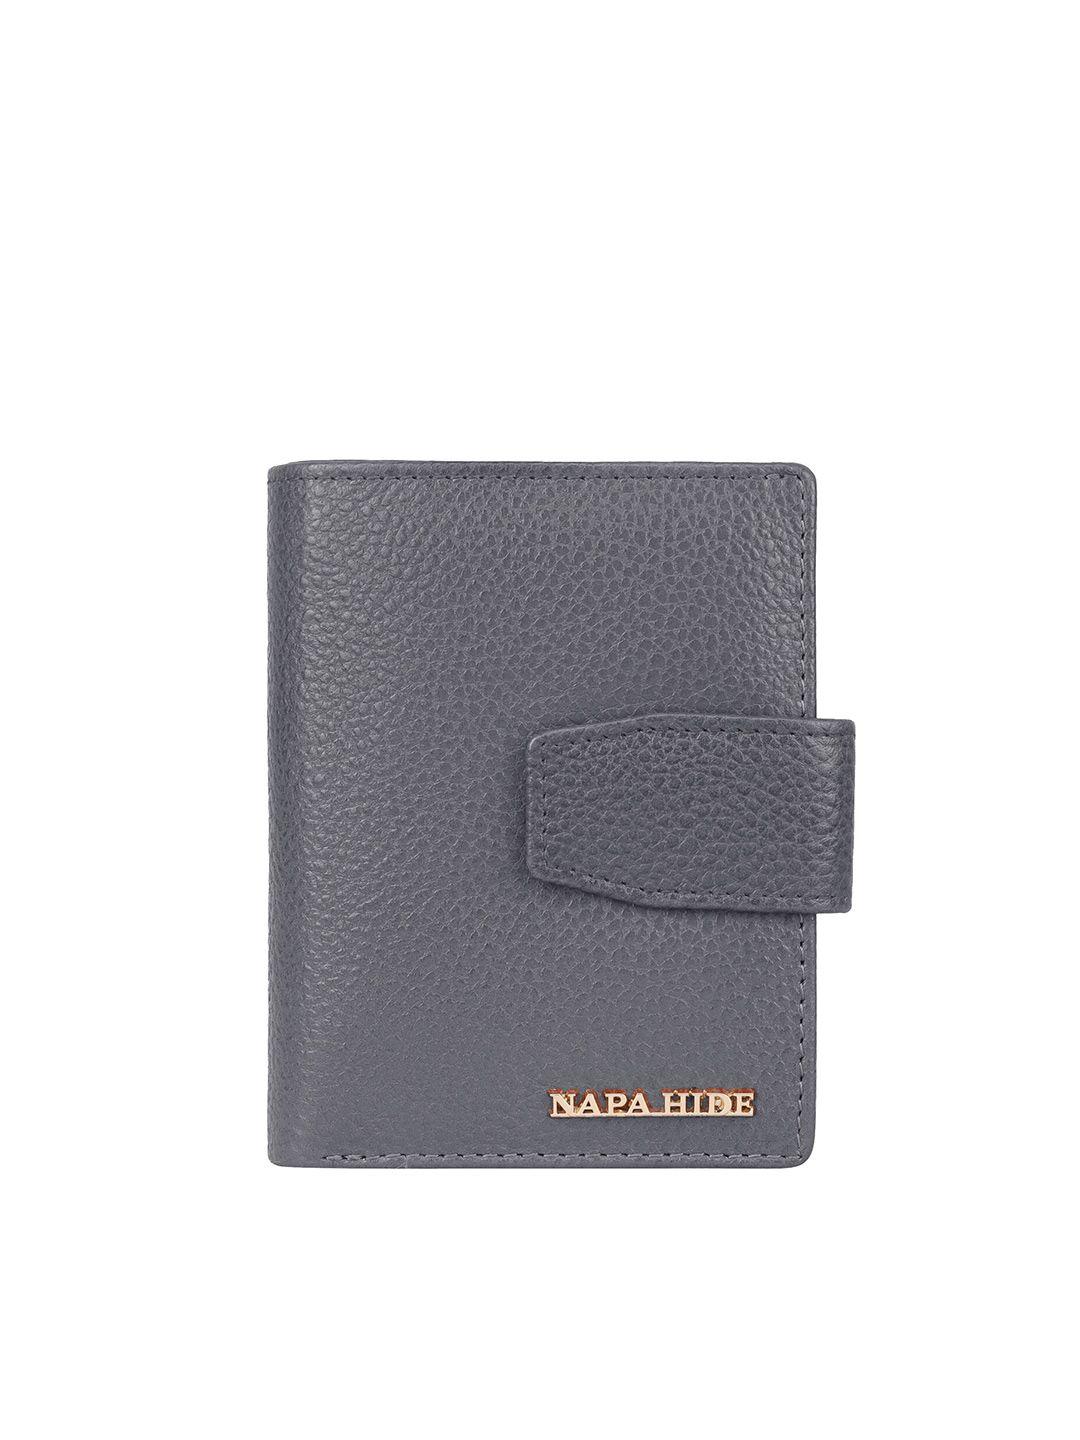 napa hide textured leather two fold wallet